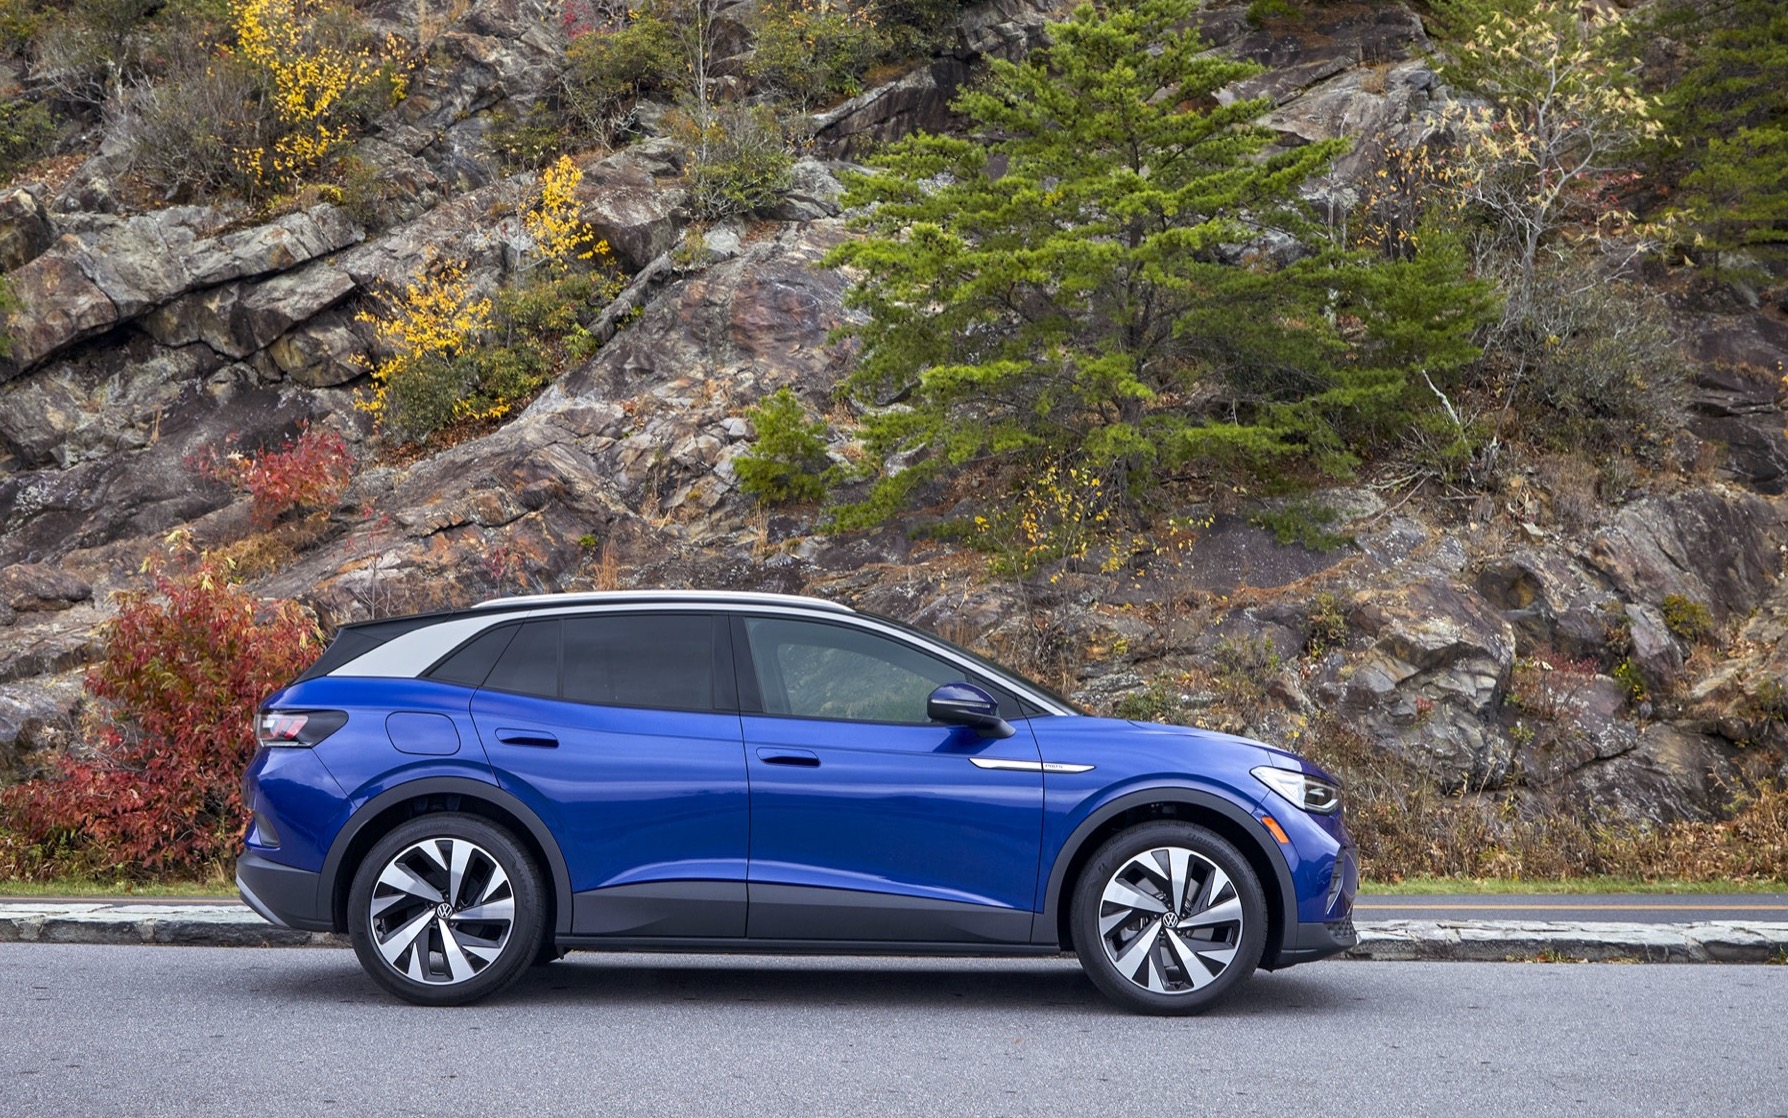 2022 Volkswagen ID.4 range boosted, now up to 280 miles evearly news